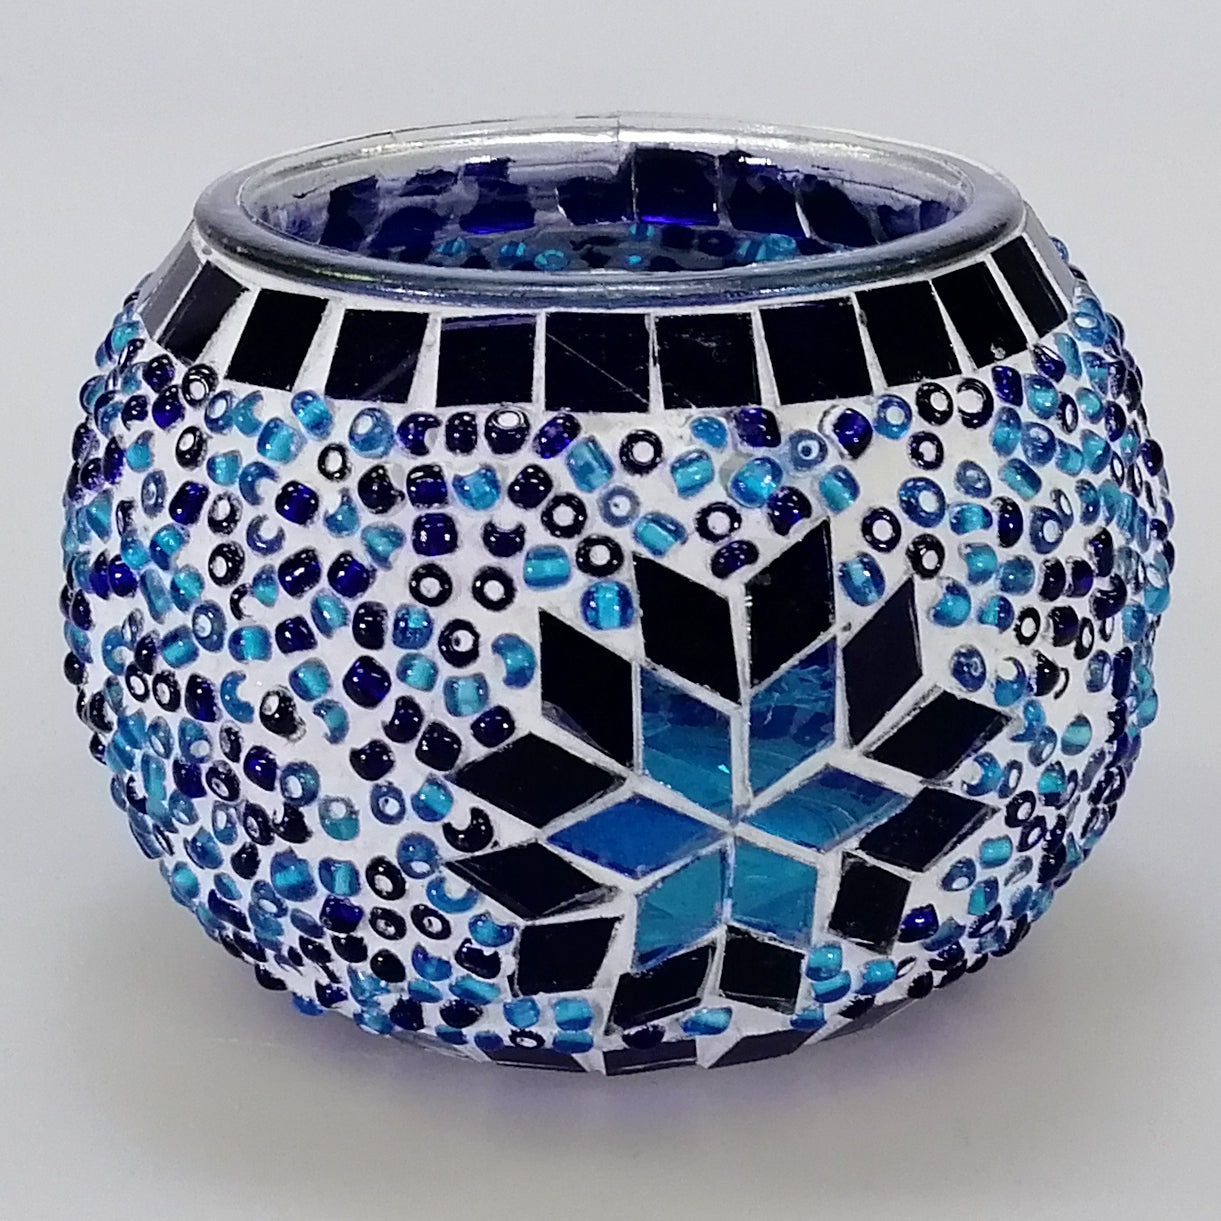 Glass Mosaic Candle Holder - Blue